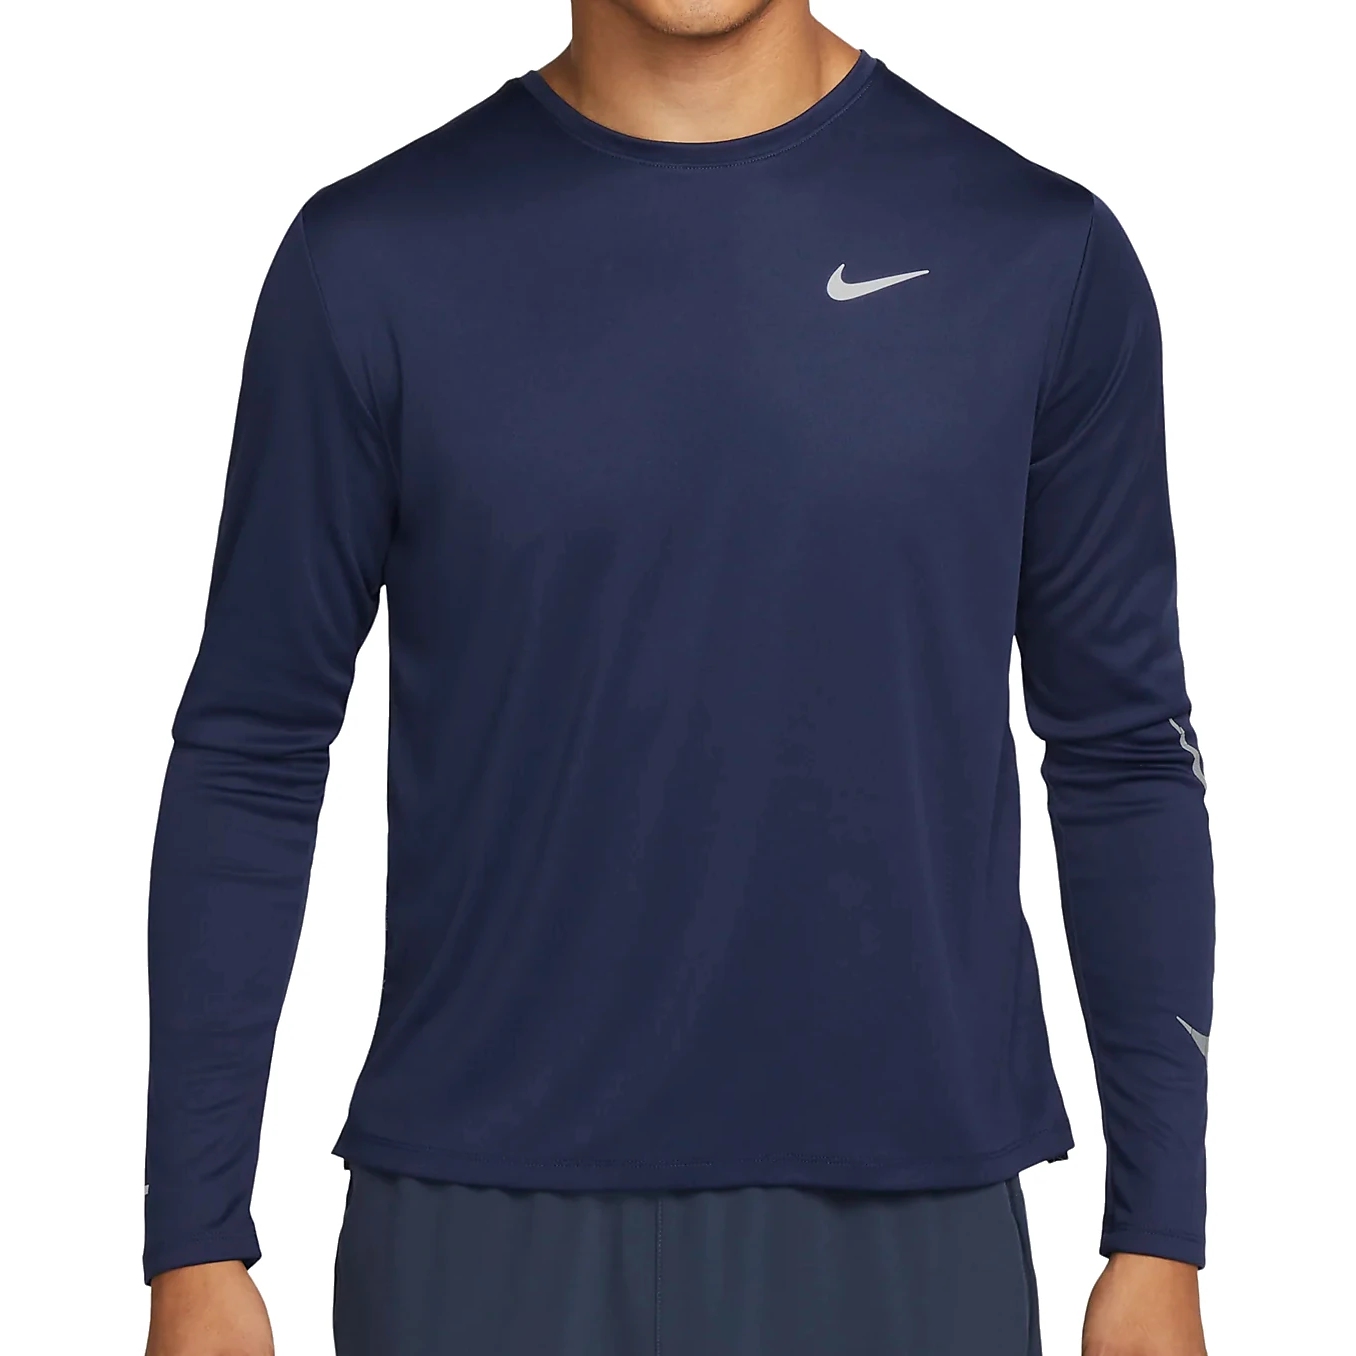 Nike T-Shirt Manches Longues Homme - Dri-FIT Miler Run Division Flash -  midnight navy/reflective silver DQ6493-410